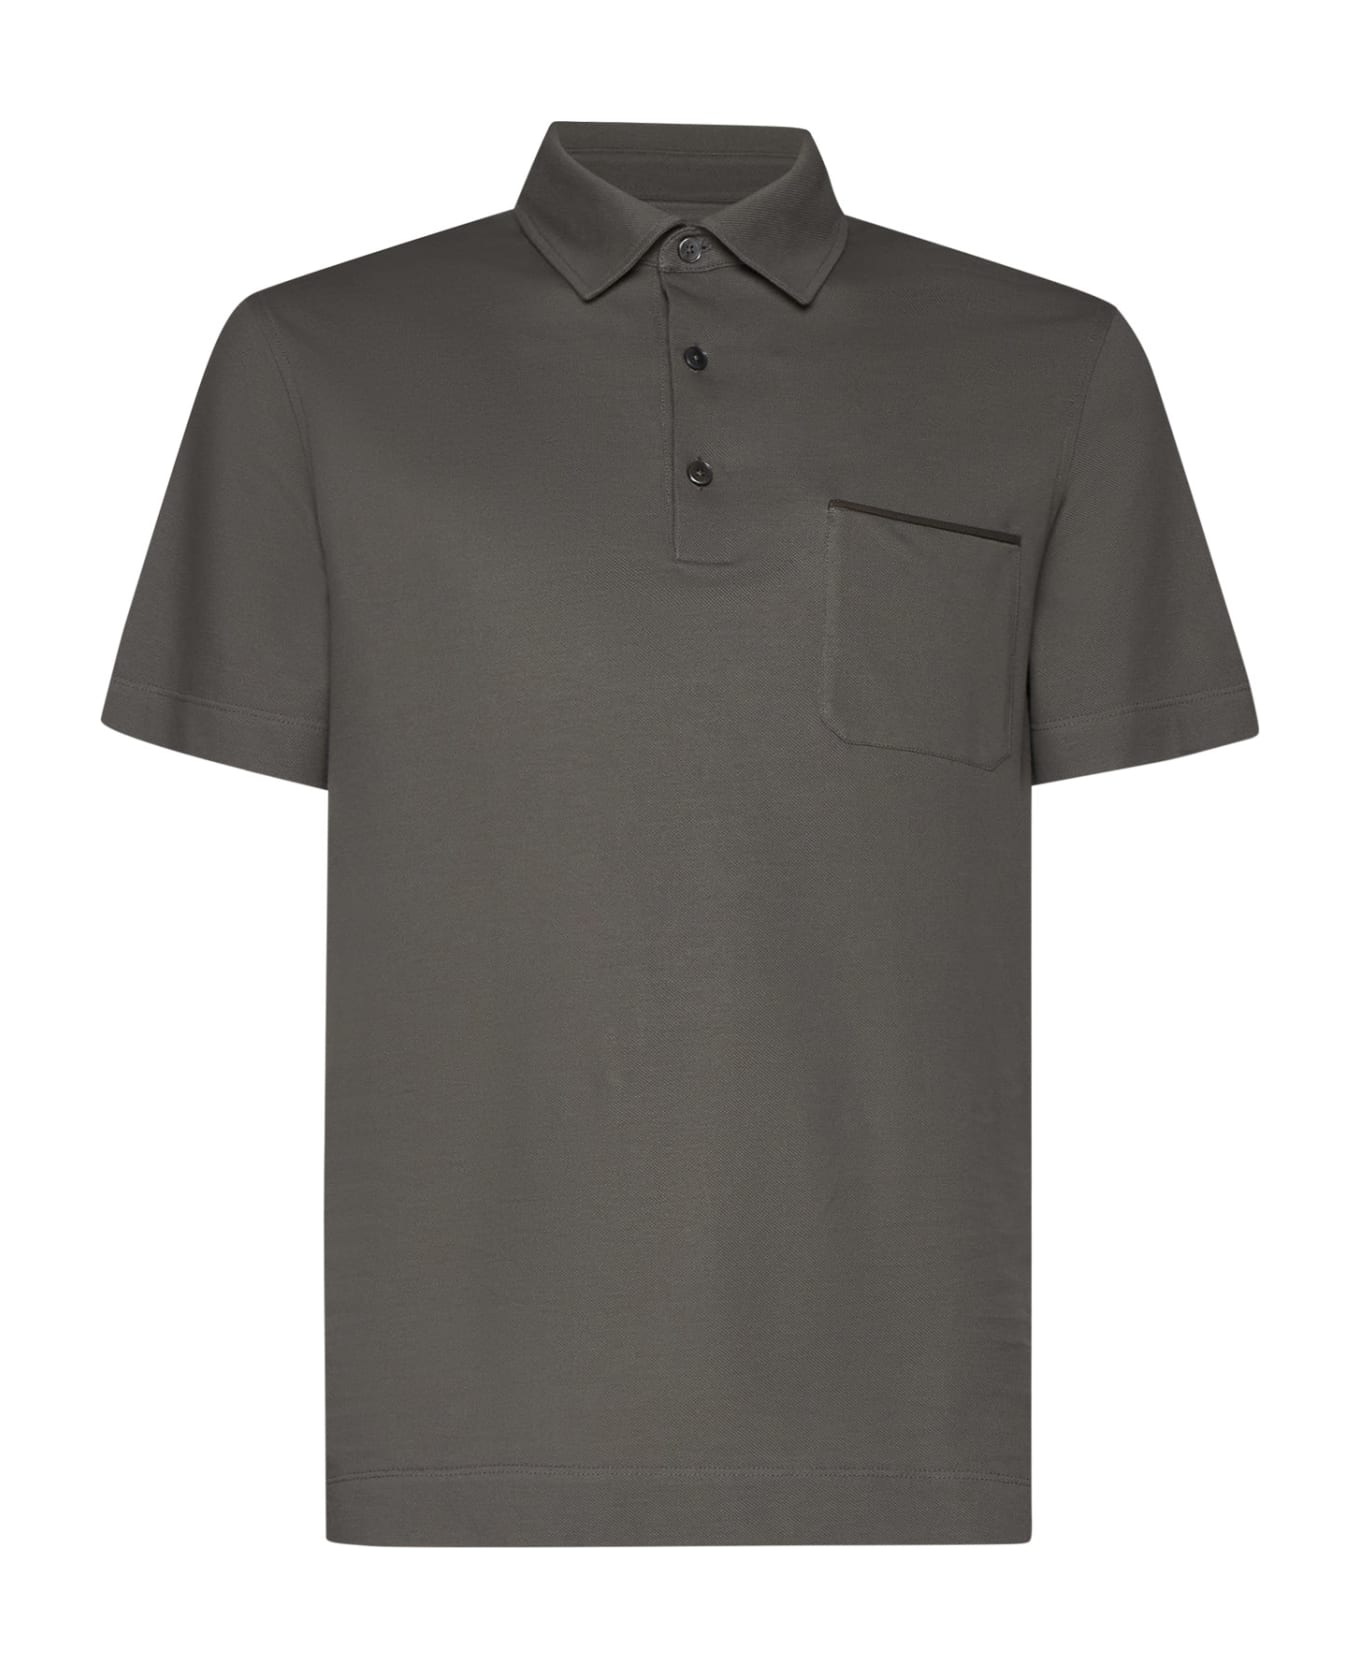 Zegna Polo Shirt - Taupe ポロシャツ